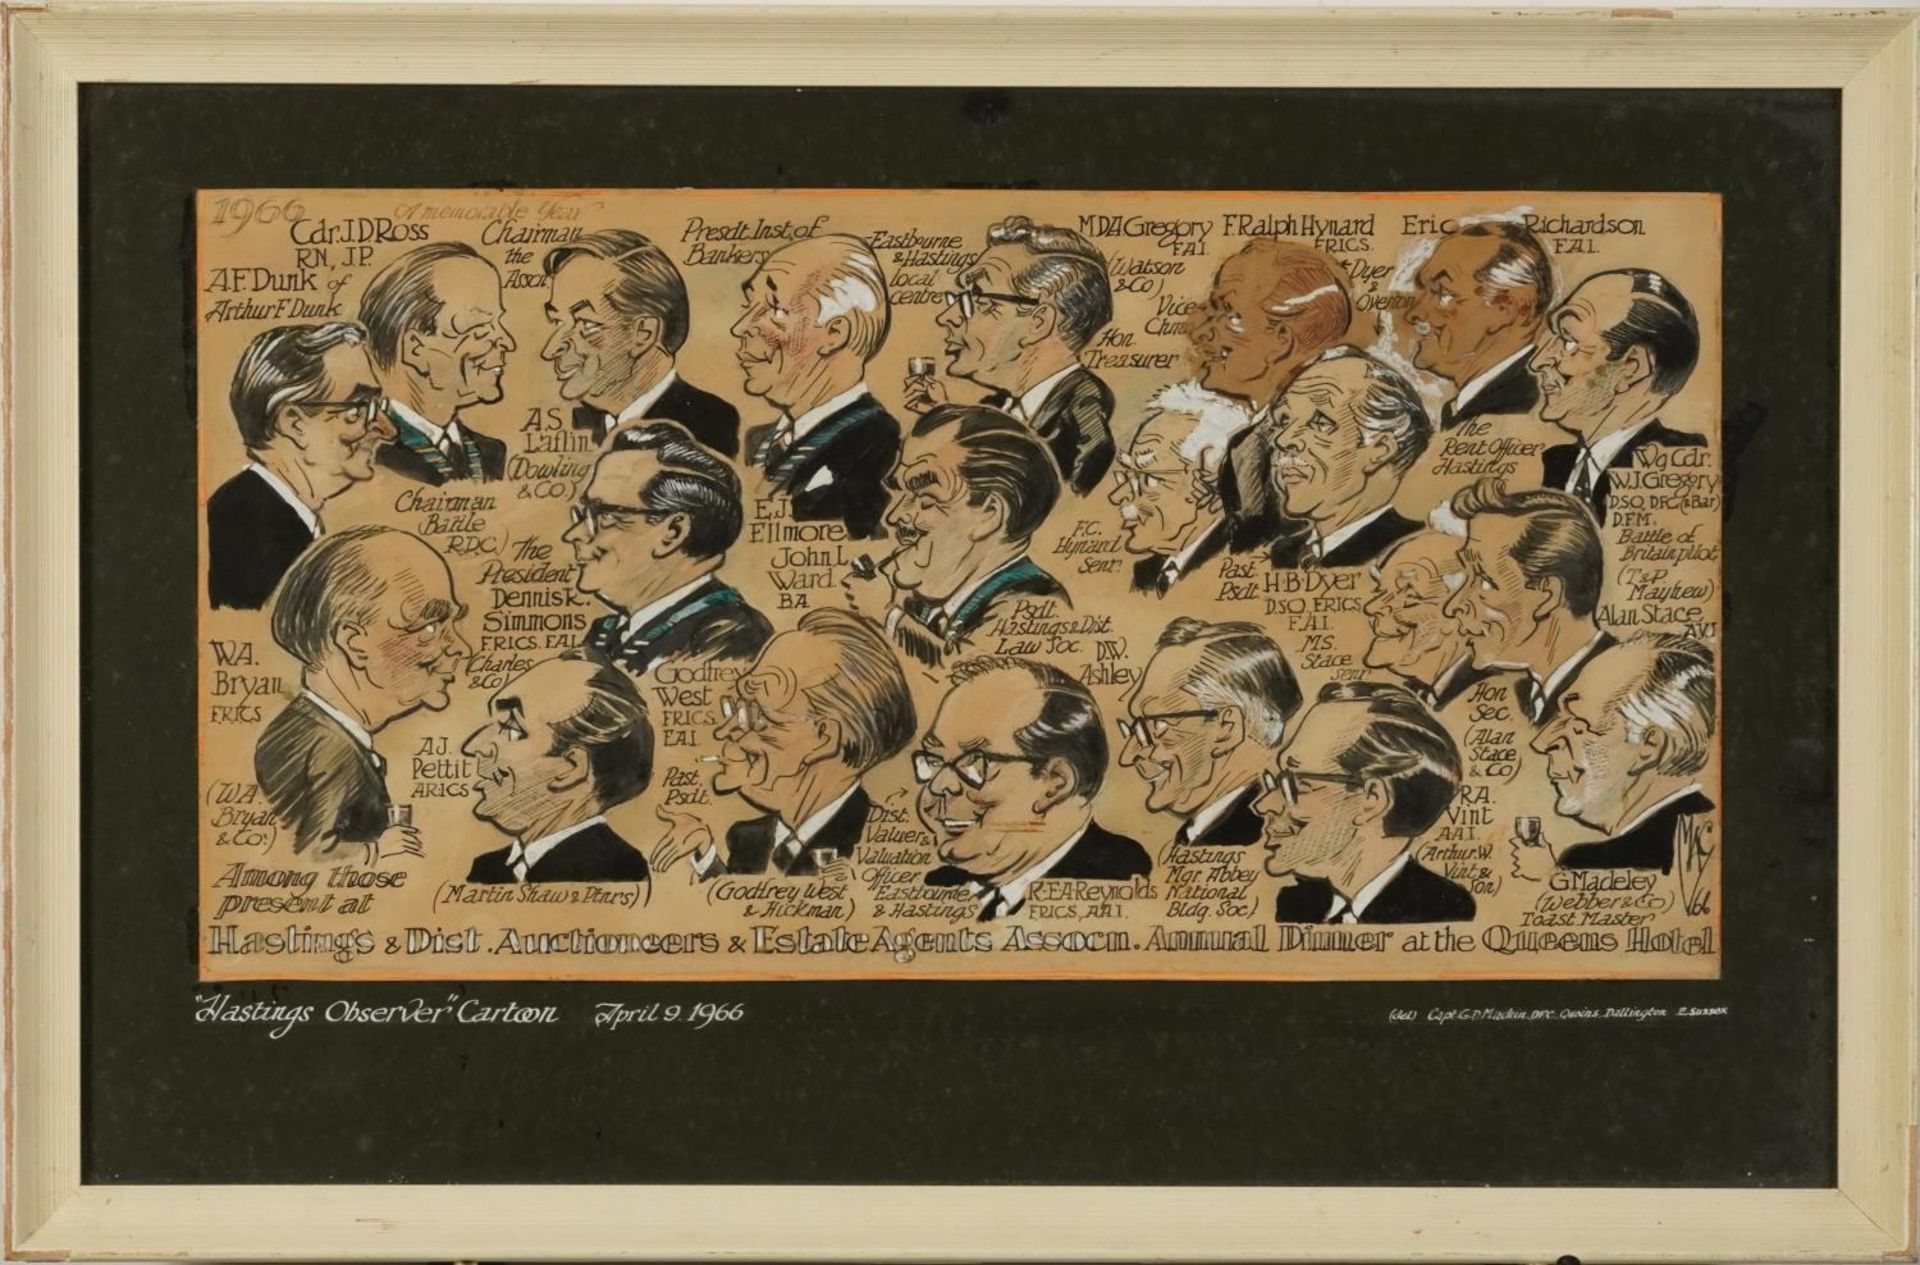 Hastings Observer cartoon 1966, heightened mixed media caricature inscribed Hastings & District - Image 3 of 12